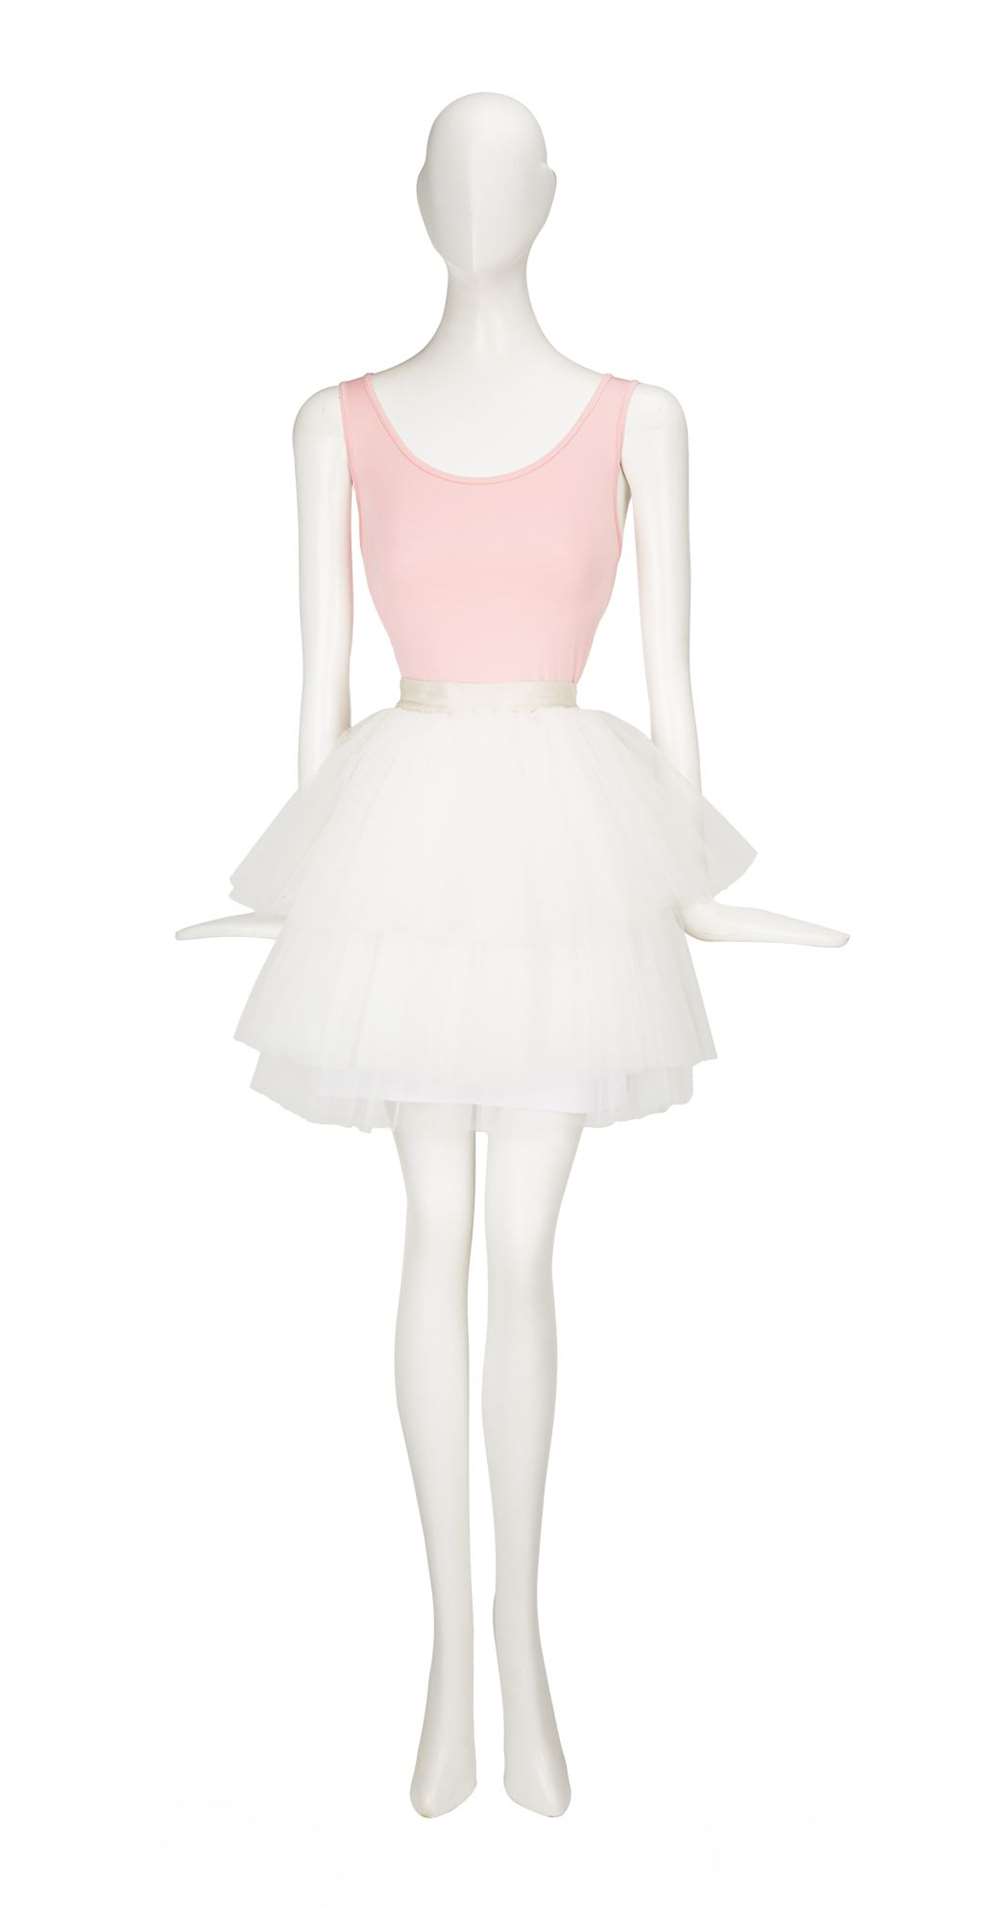 The tutu worn by Sarah Jessica Parker in the opening credits of Sex And The City (Julien’s Auctions/PA)